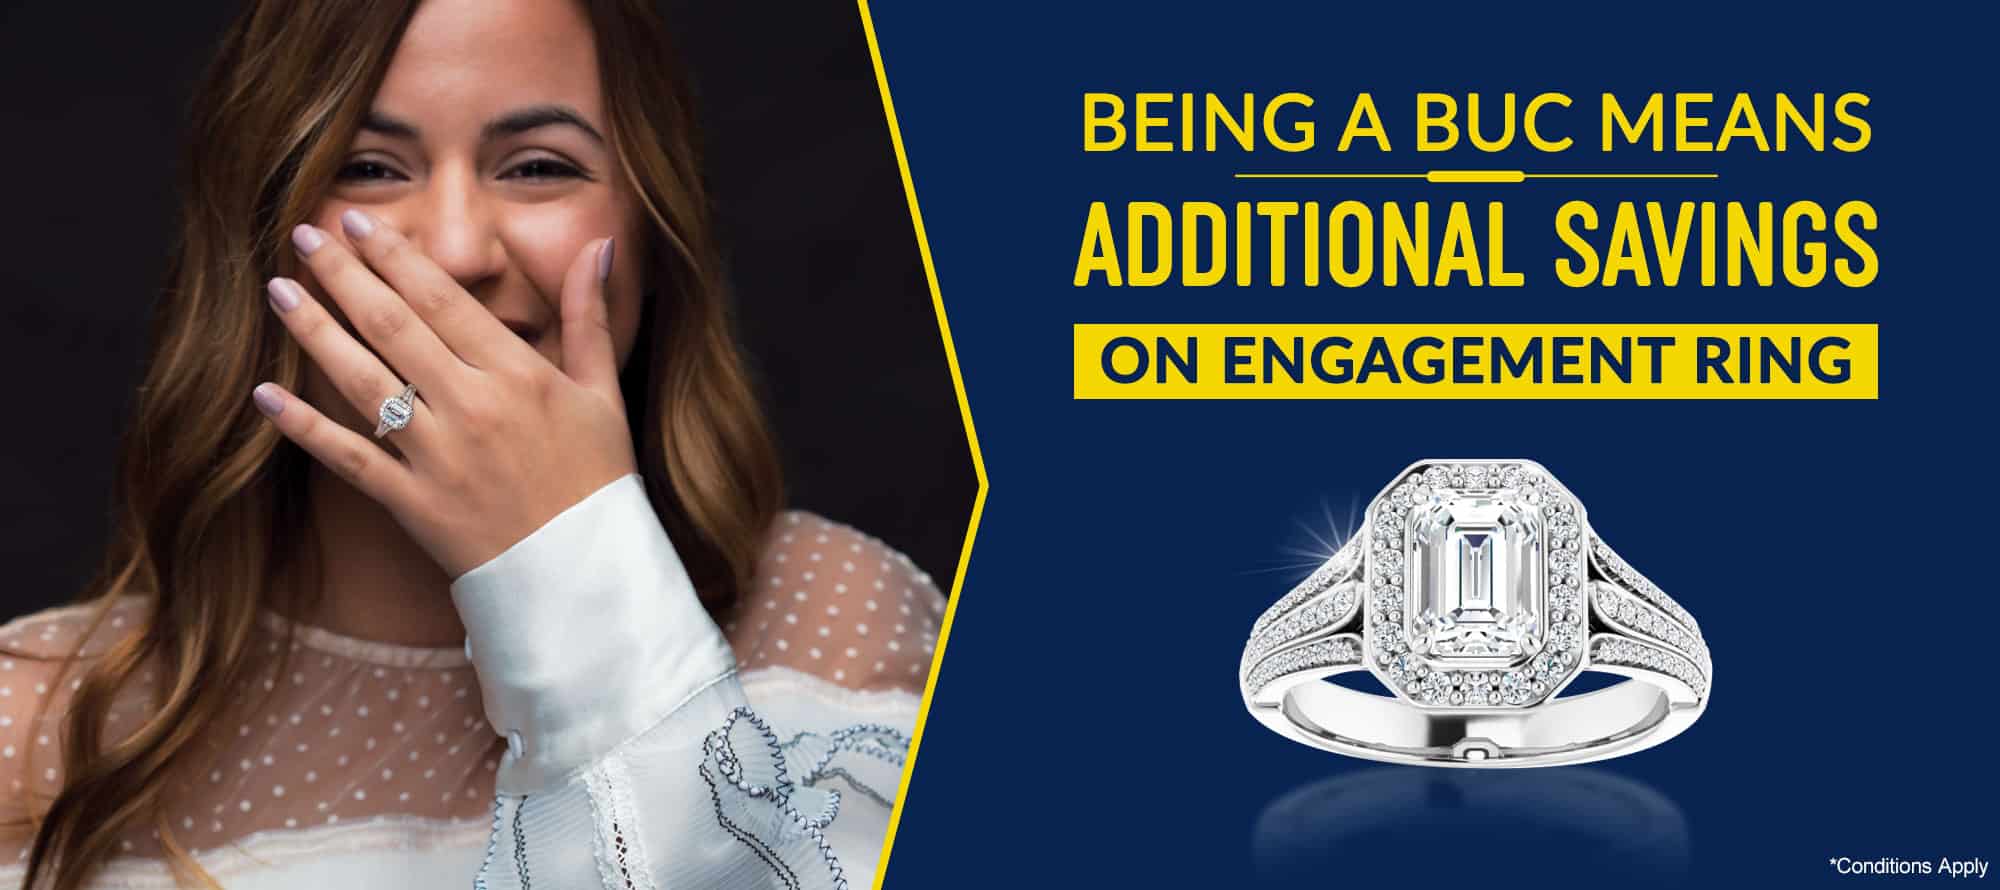 ETSU Discount on Engagement Rings at Bowman Jewelers